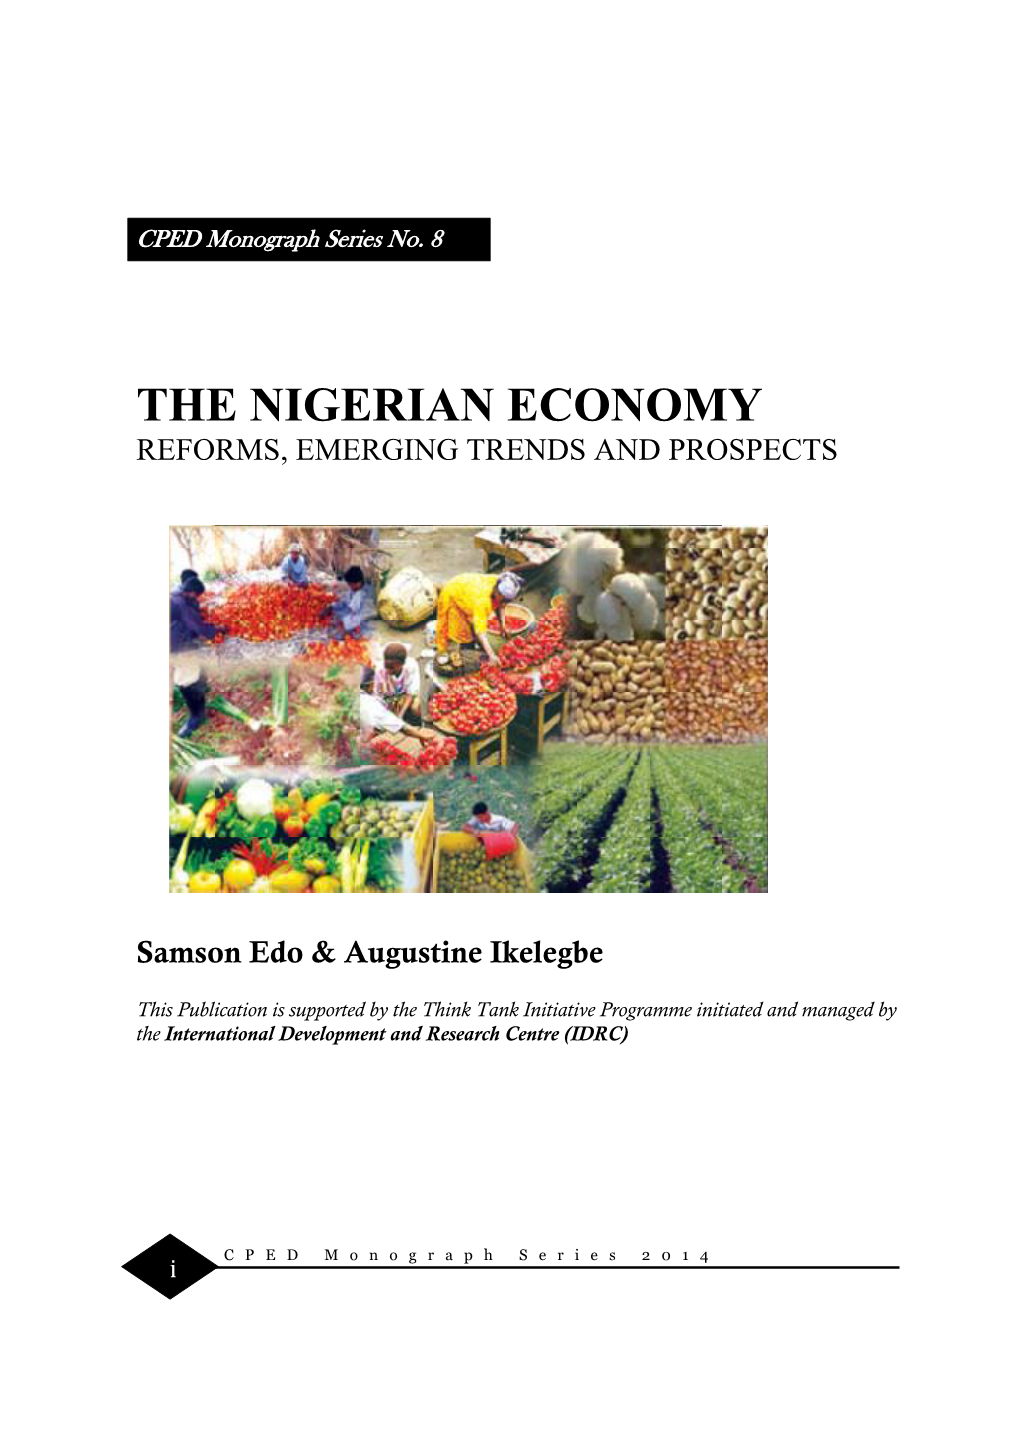 The Nigerian Economy Reforms, Emerging Trends and Prospects